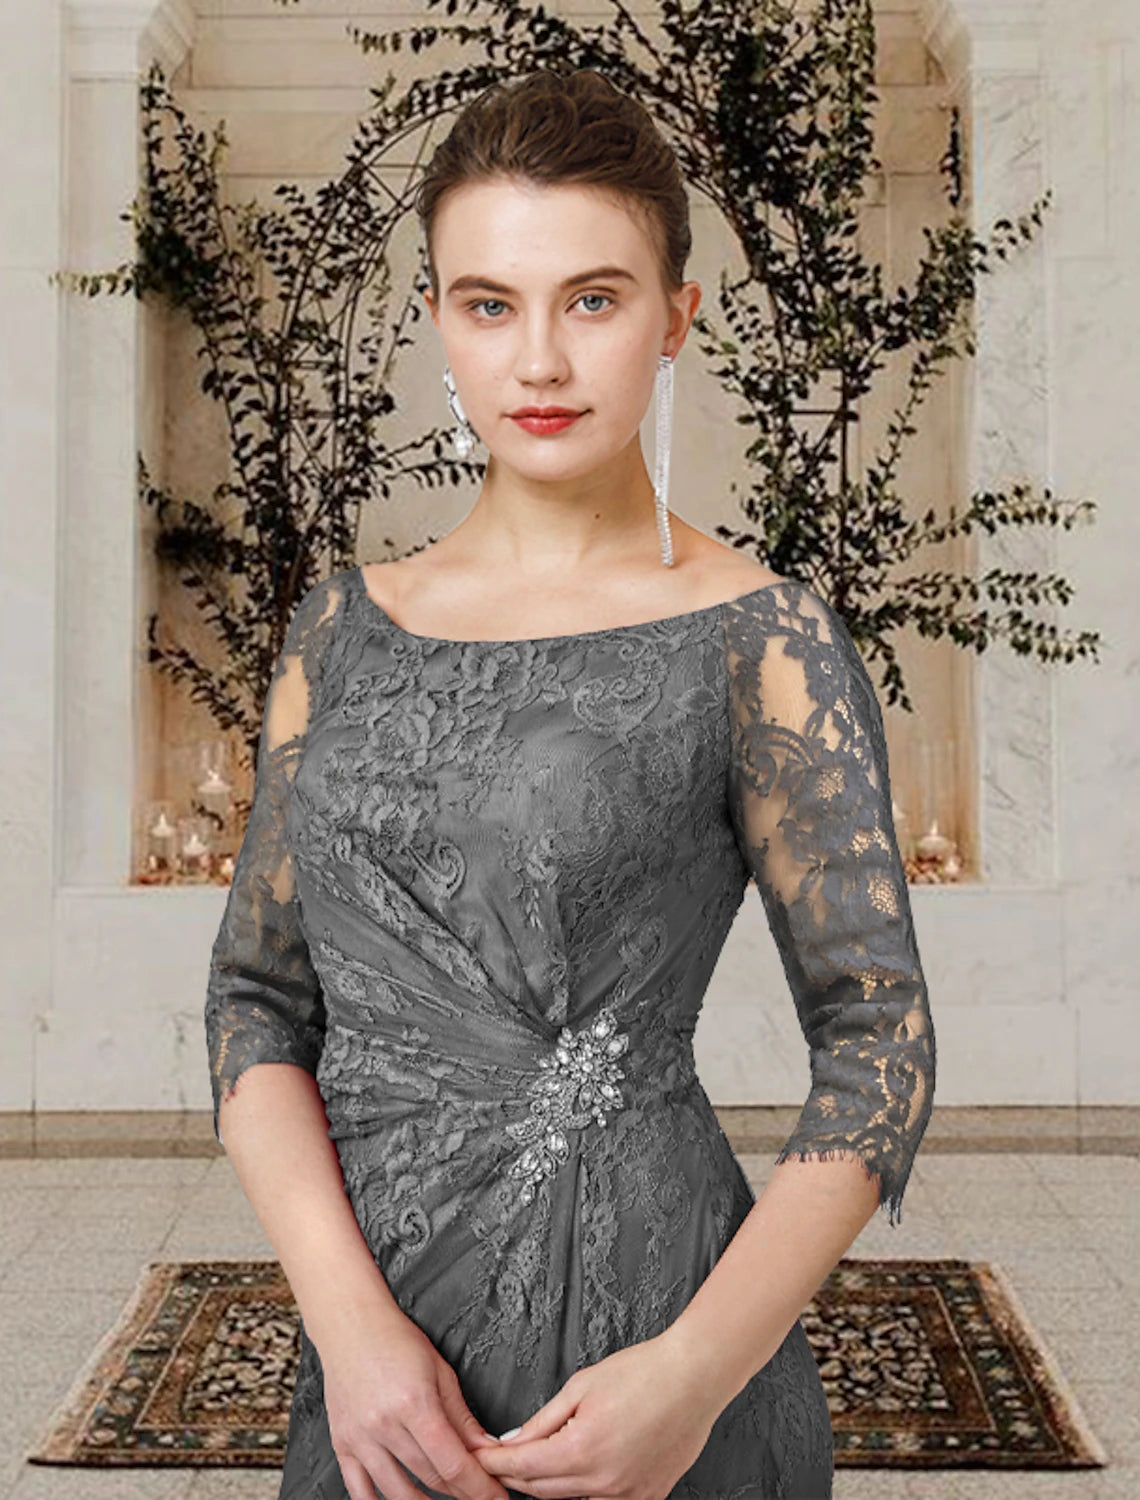 A-Line Mother of the Bride Dress Wedding Guest Plus Size Elegant Jewel Neck Floor Length Lace Short Sleeve with Ruffles Crystal Brooch Side-Draped Fall